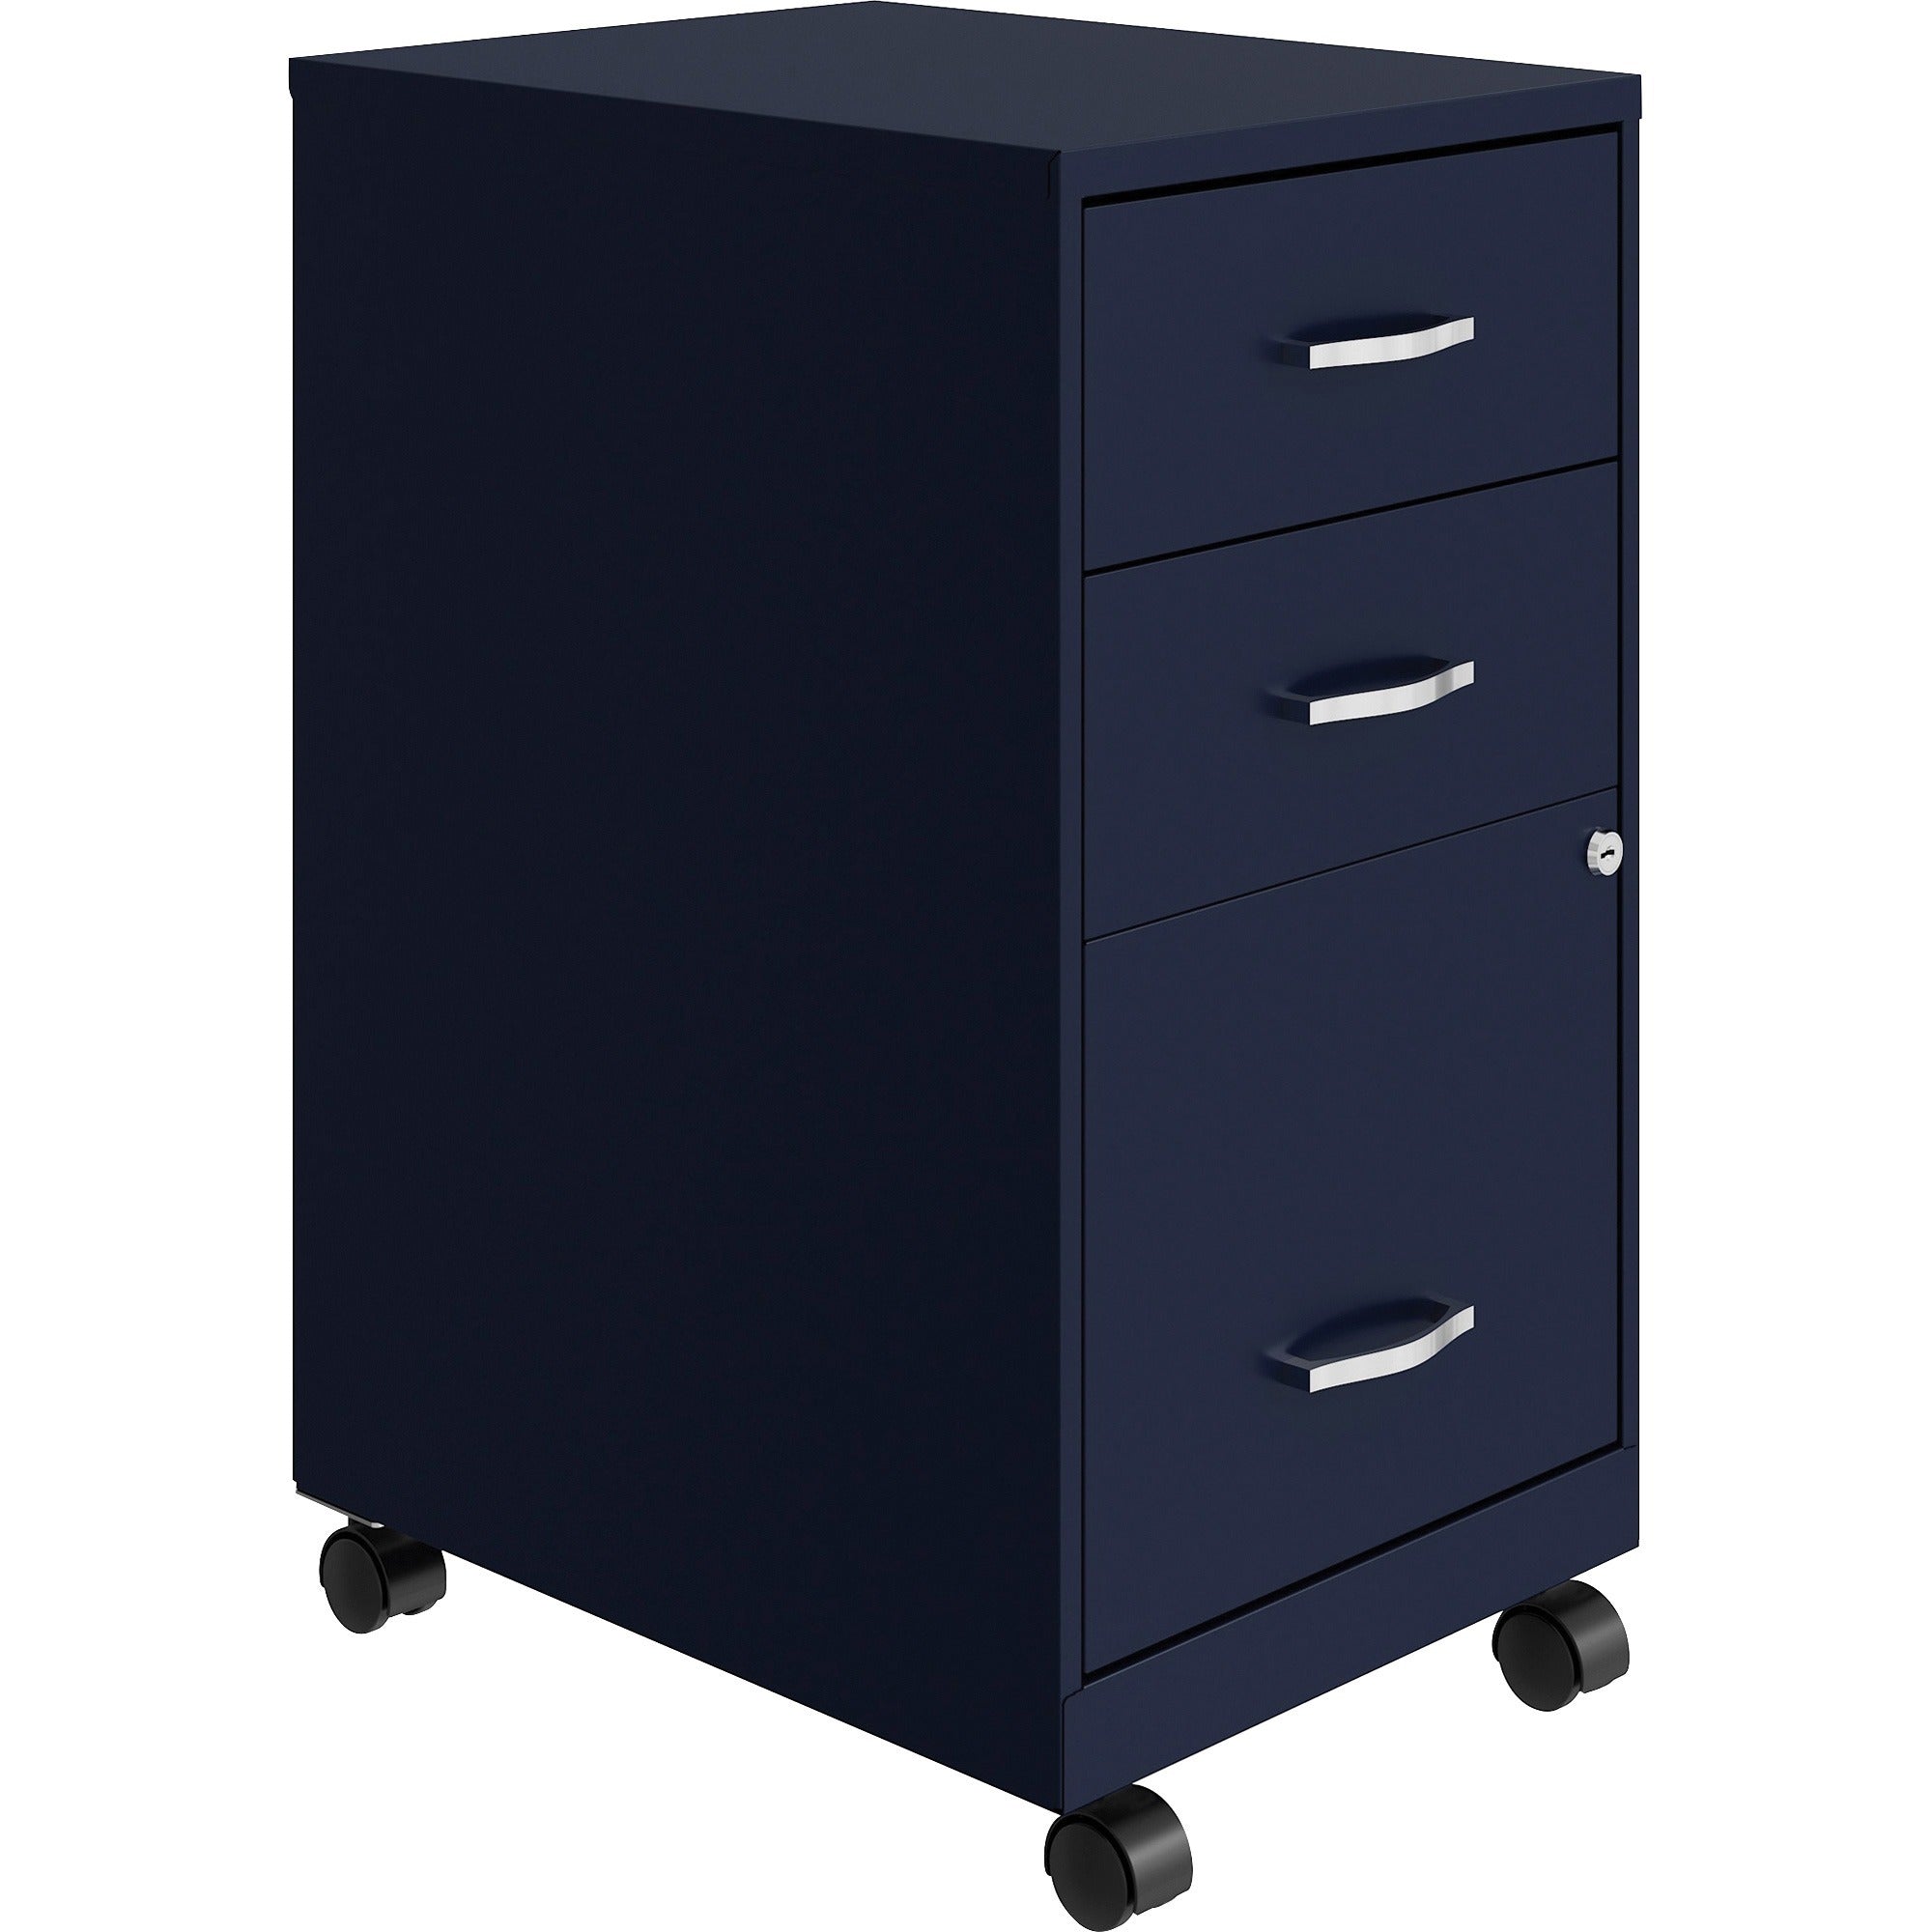 nusparc-3-drawer-organizer-metal-file-cabinet-142-x-18-x-267-3-x-drawers-for-file-box-letter-glide-suspension-3-4-drawer-extension-anti-tip-lockable-mobility-navy-metal-recycled_nprvf318cmny - 1